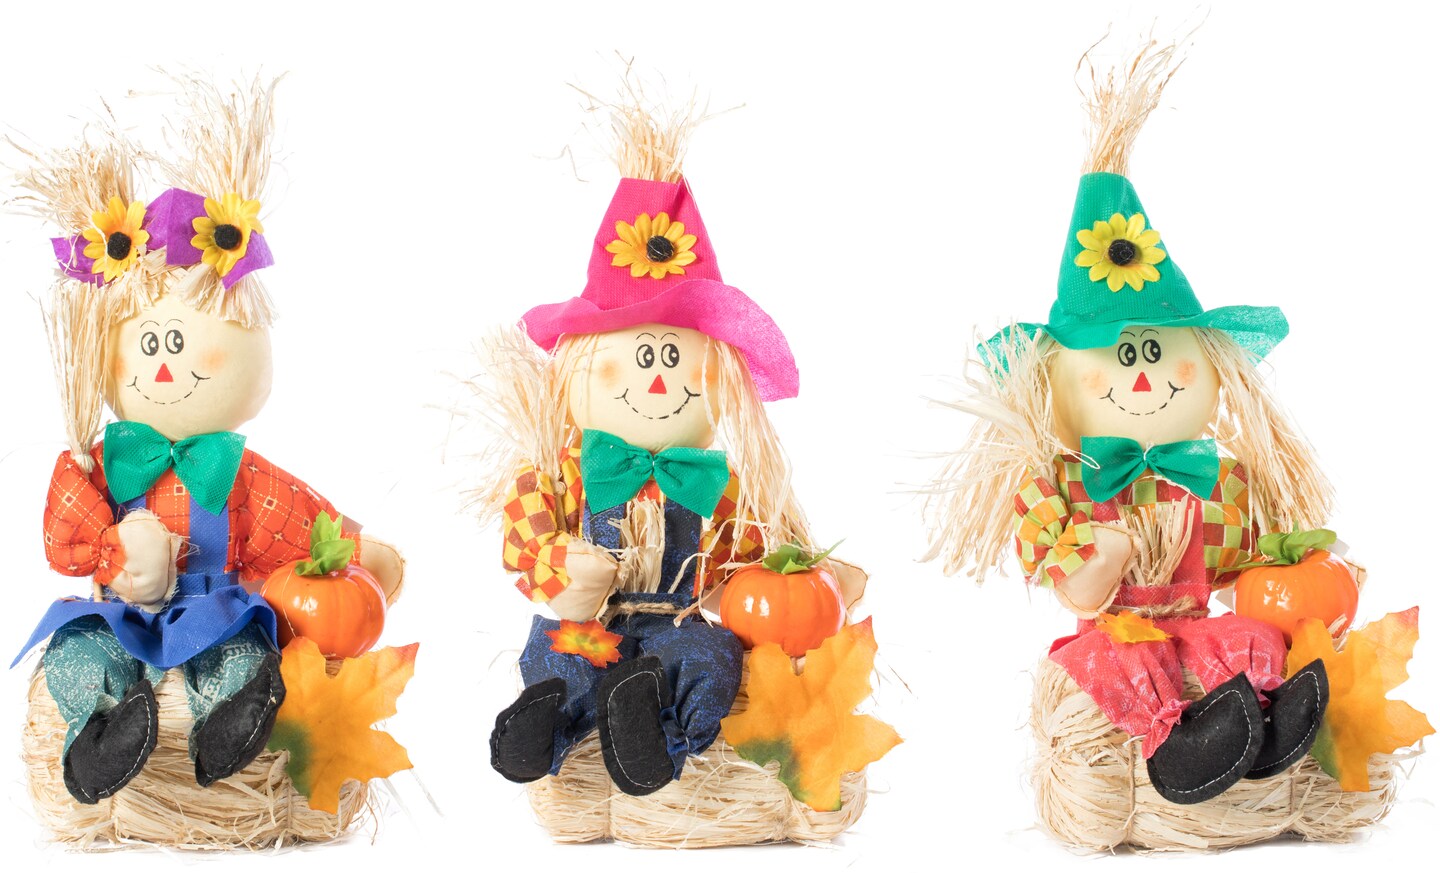 Set of 3 Garden Scarecrows Sitting on Hay Bale